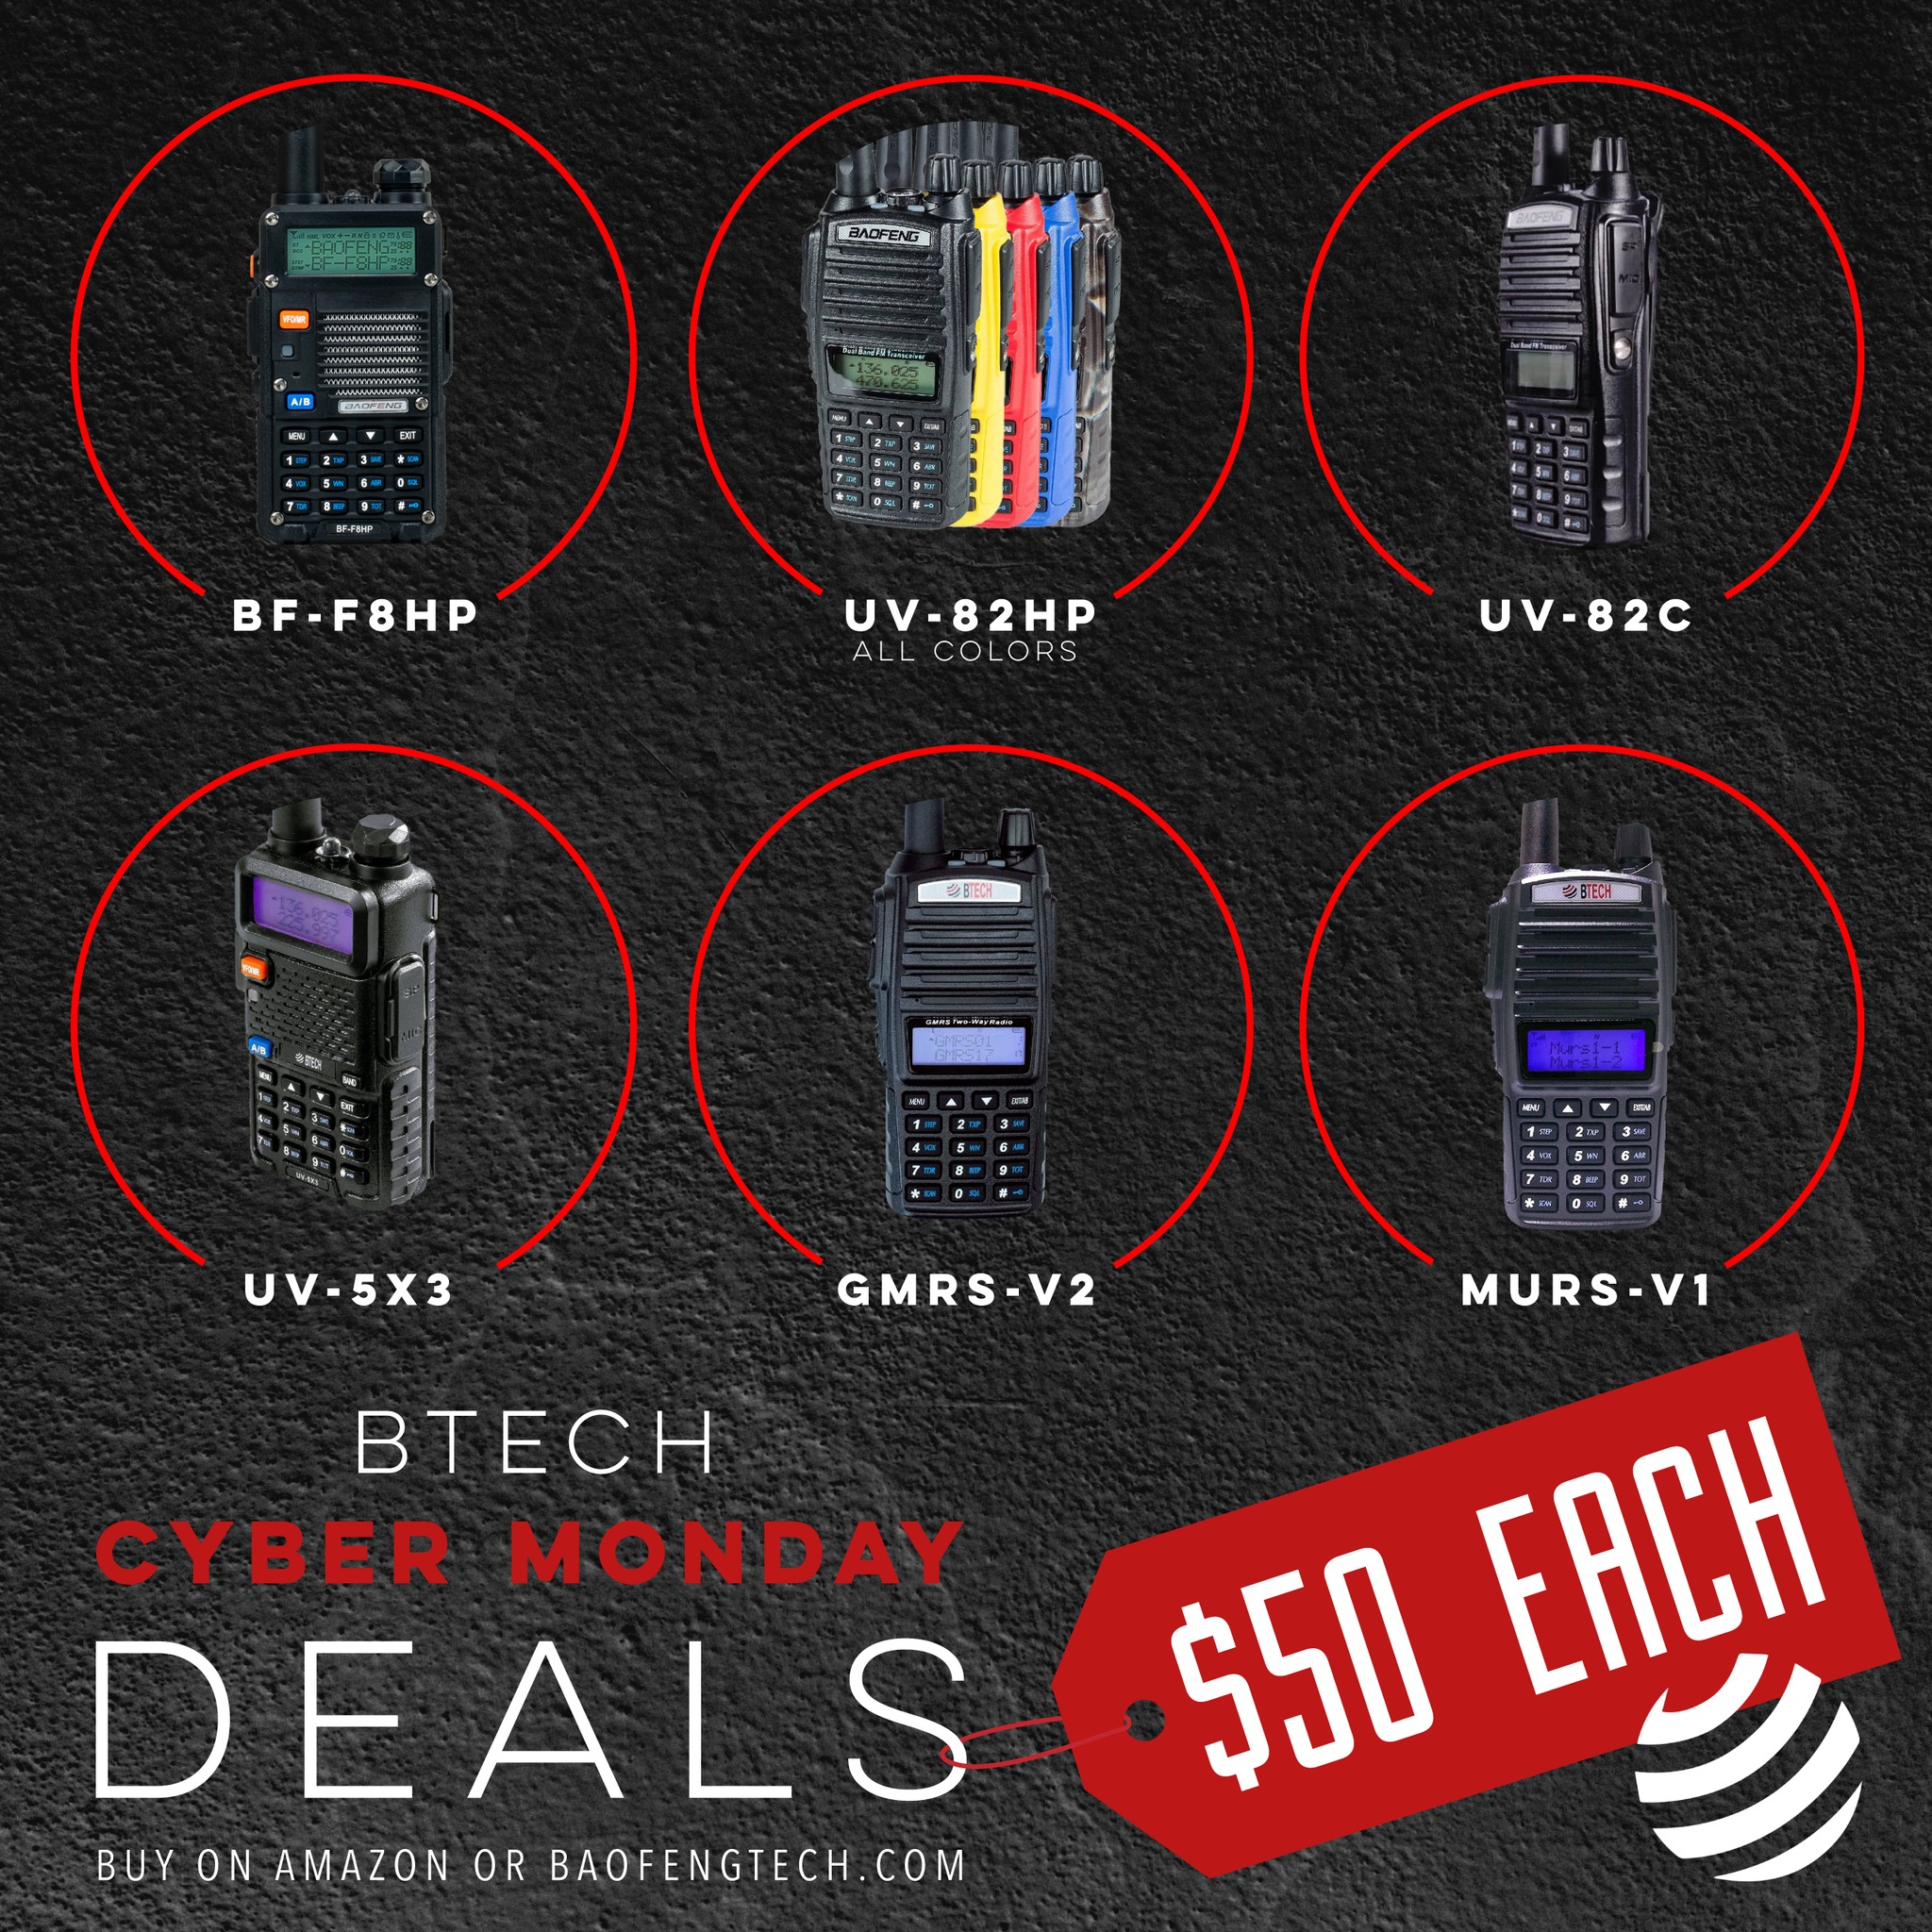 $50 for a number of handheld radios: BF-F8HP, UV-82C, UV-82HP, UV-5X3, GMRS-V2, and MURS-V1. Deals last through Monday, so get yours now!

Plus a few surprise items on sale : baofengtech.com/store 

 #UV #gmrs #murs #handheld #radio #sale #blackfriday #deals #prep #gifts #holidays #hamradio #survival #outdoors #adventure #tech #CyberMonday